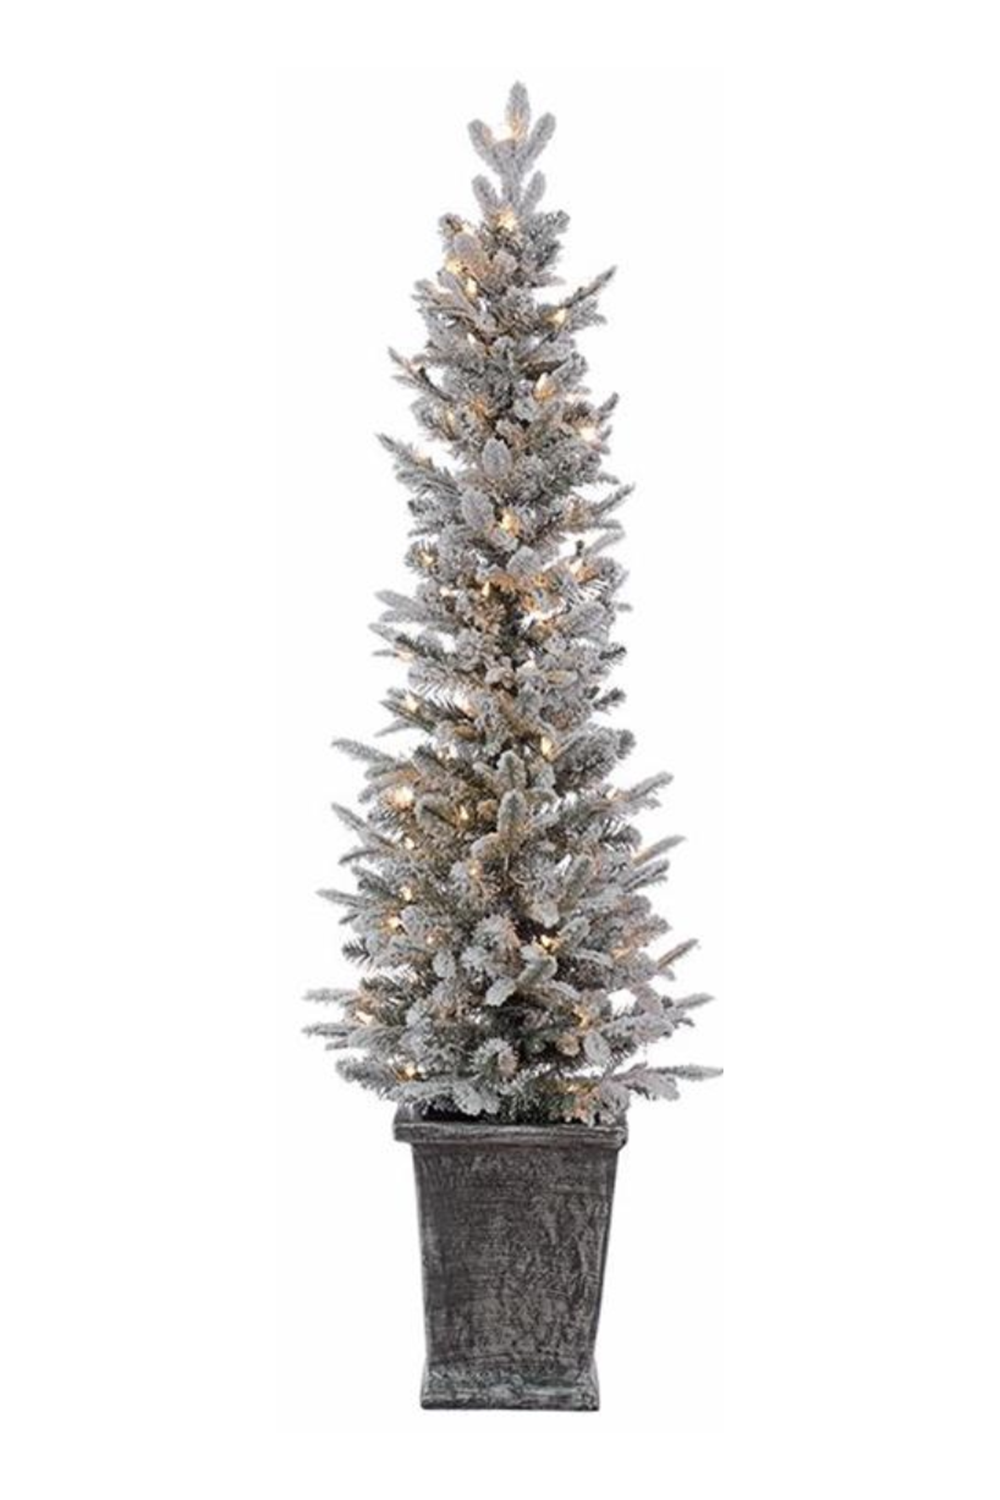 Snowy Spruce Potted Tree